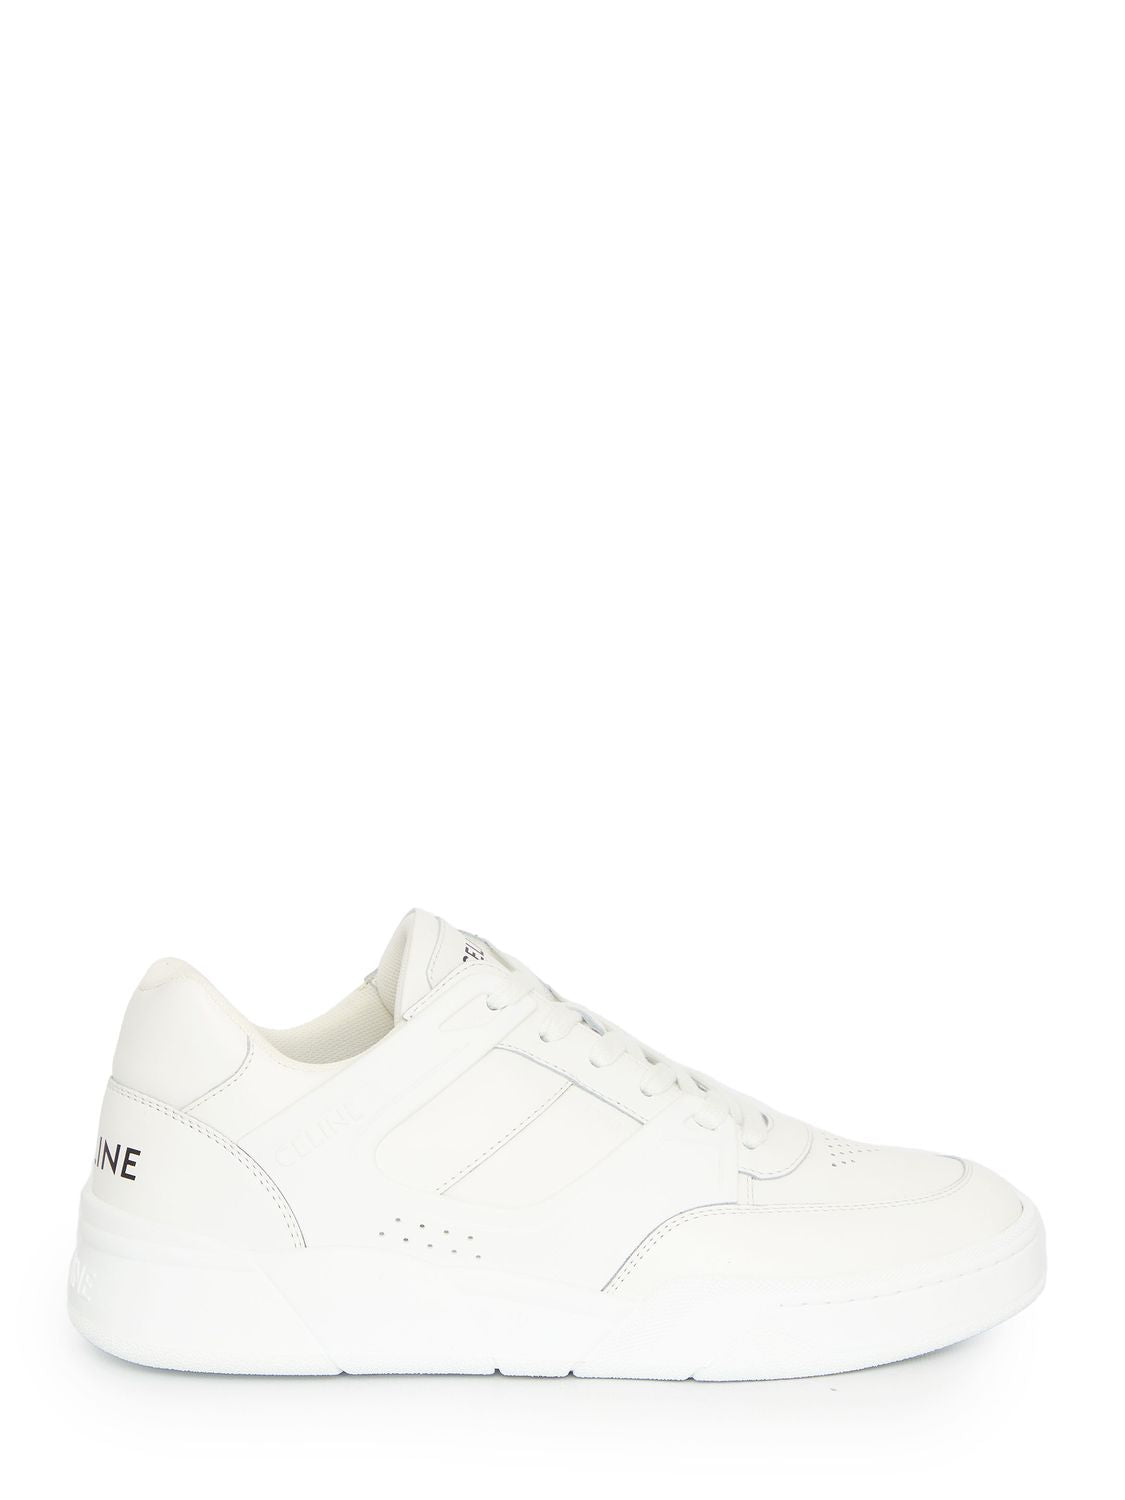 CELINE Men's White Perforated Low Top Sneakers - Italian Sizing